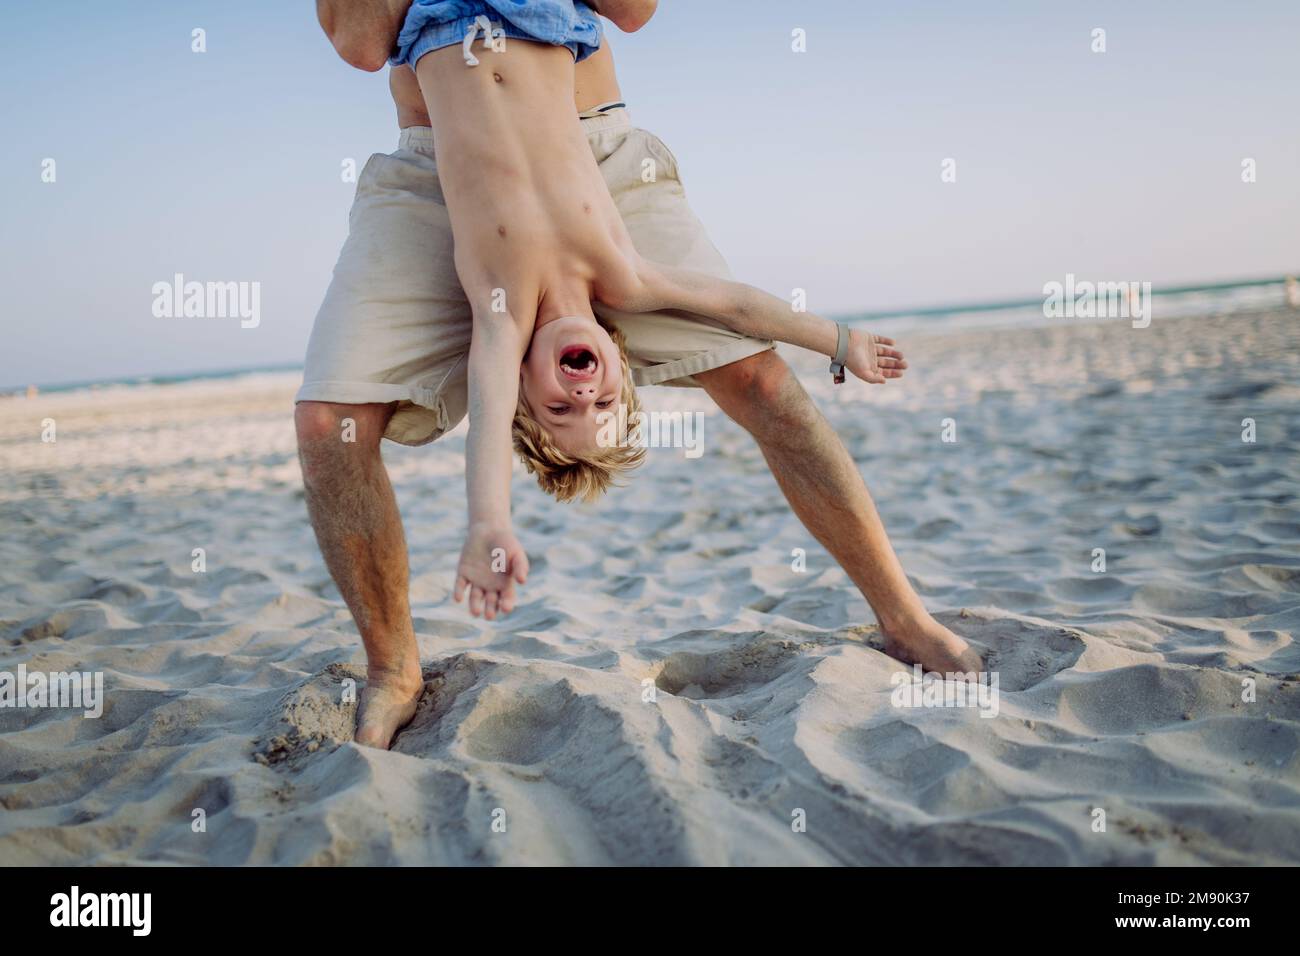 Father holding his son upside down, enjoying summer vacation, having fun. Stock Photo